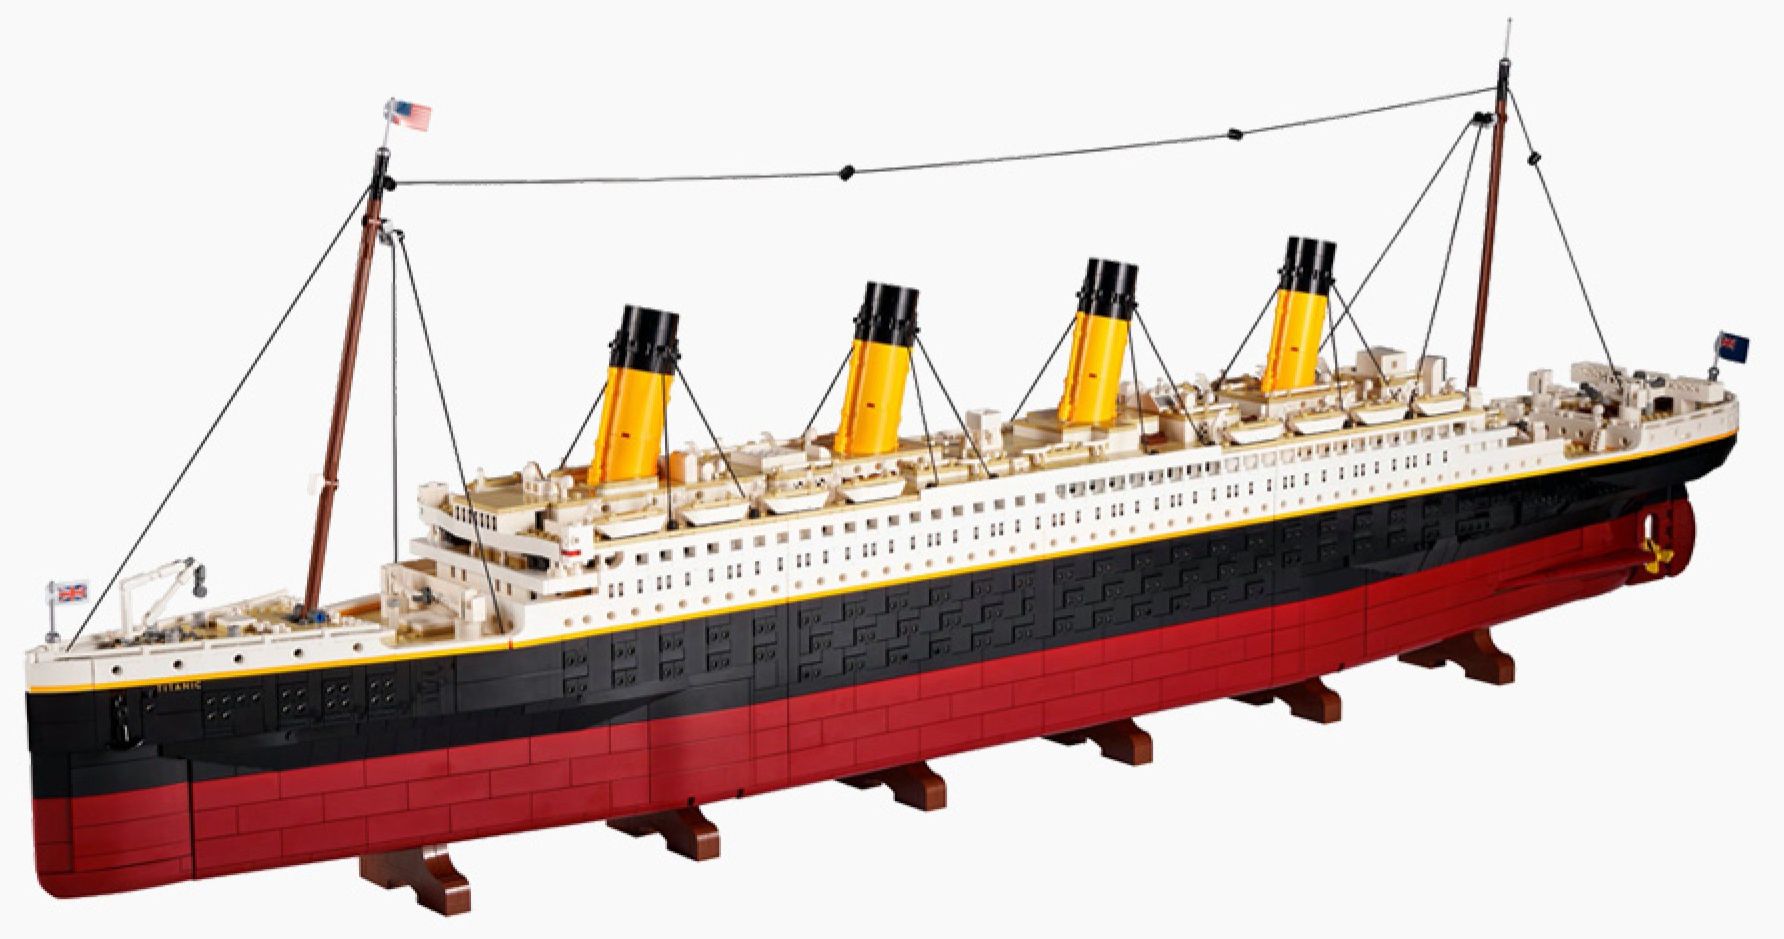 LEGO's Titanic Set Is the Company's Largest Ever with 9,090 Pieces